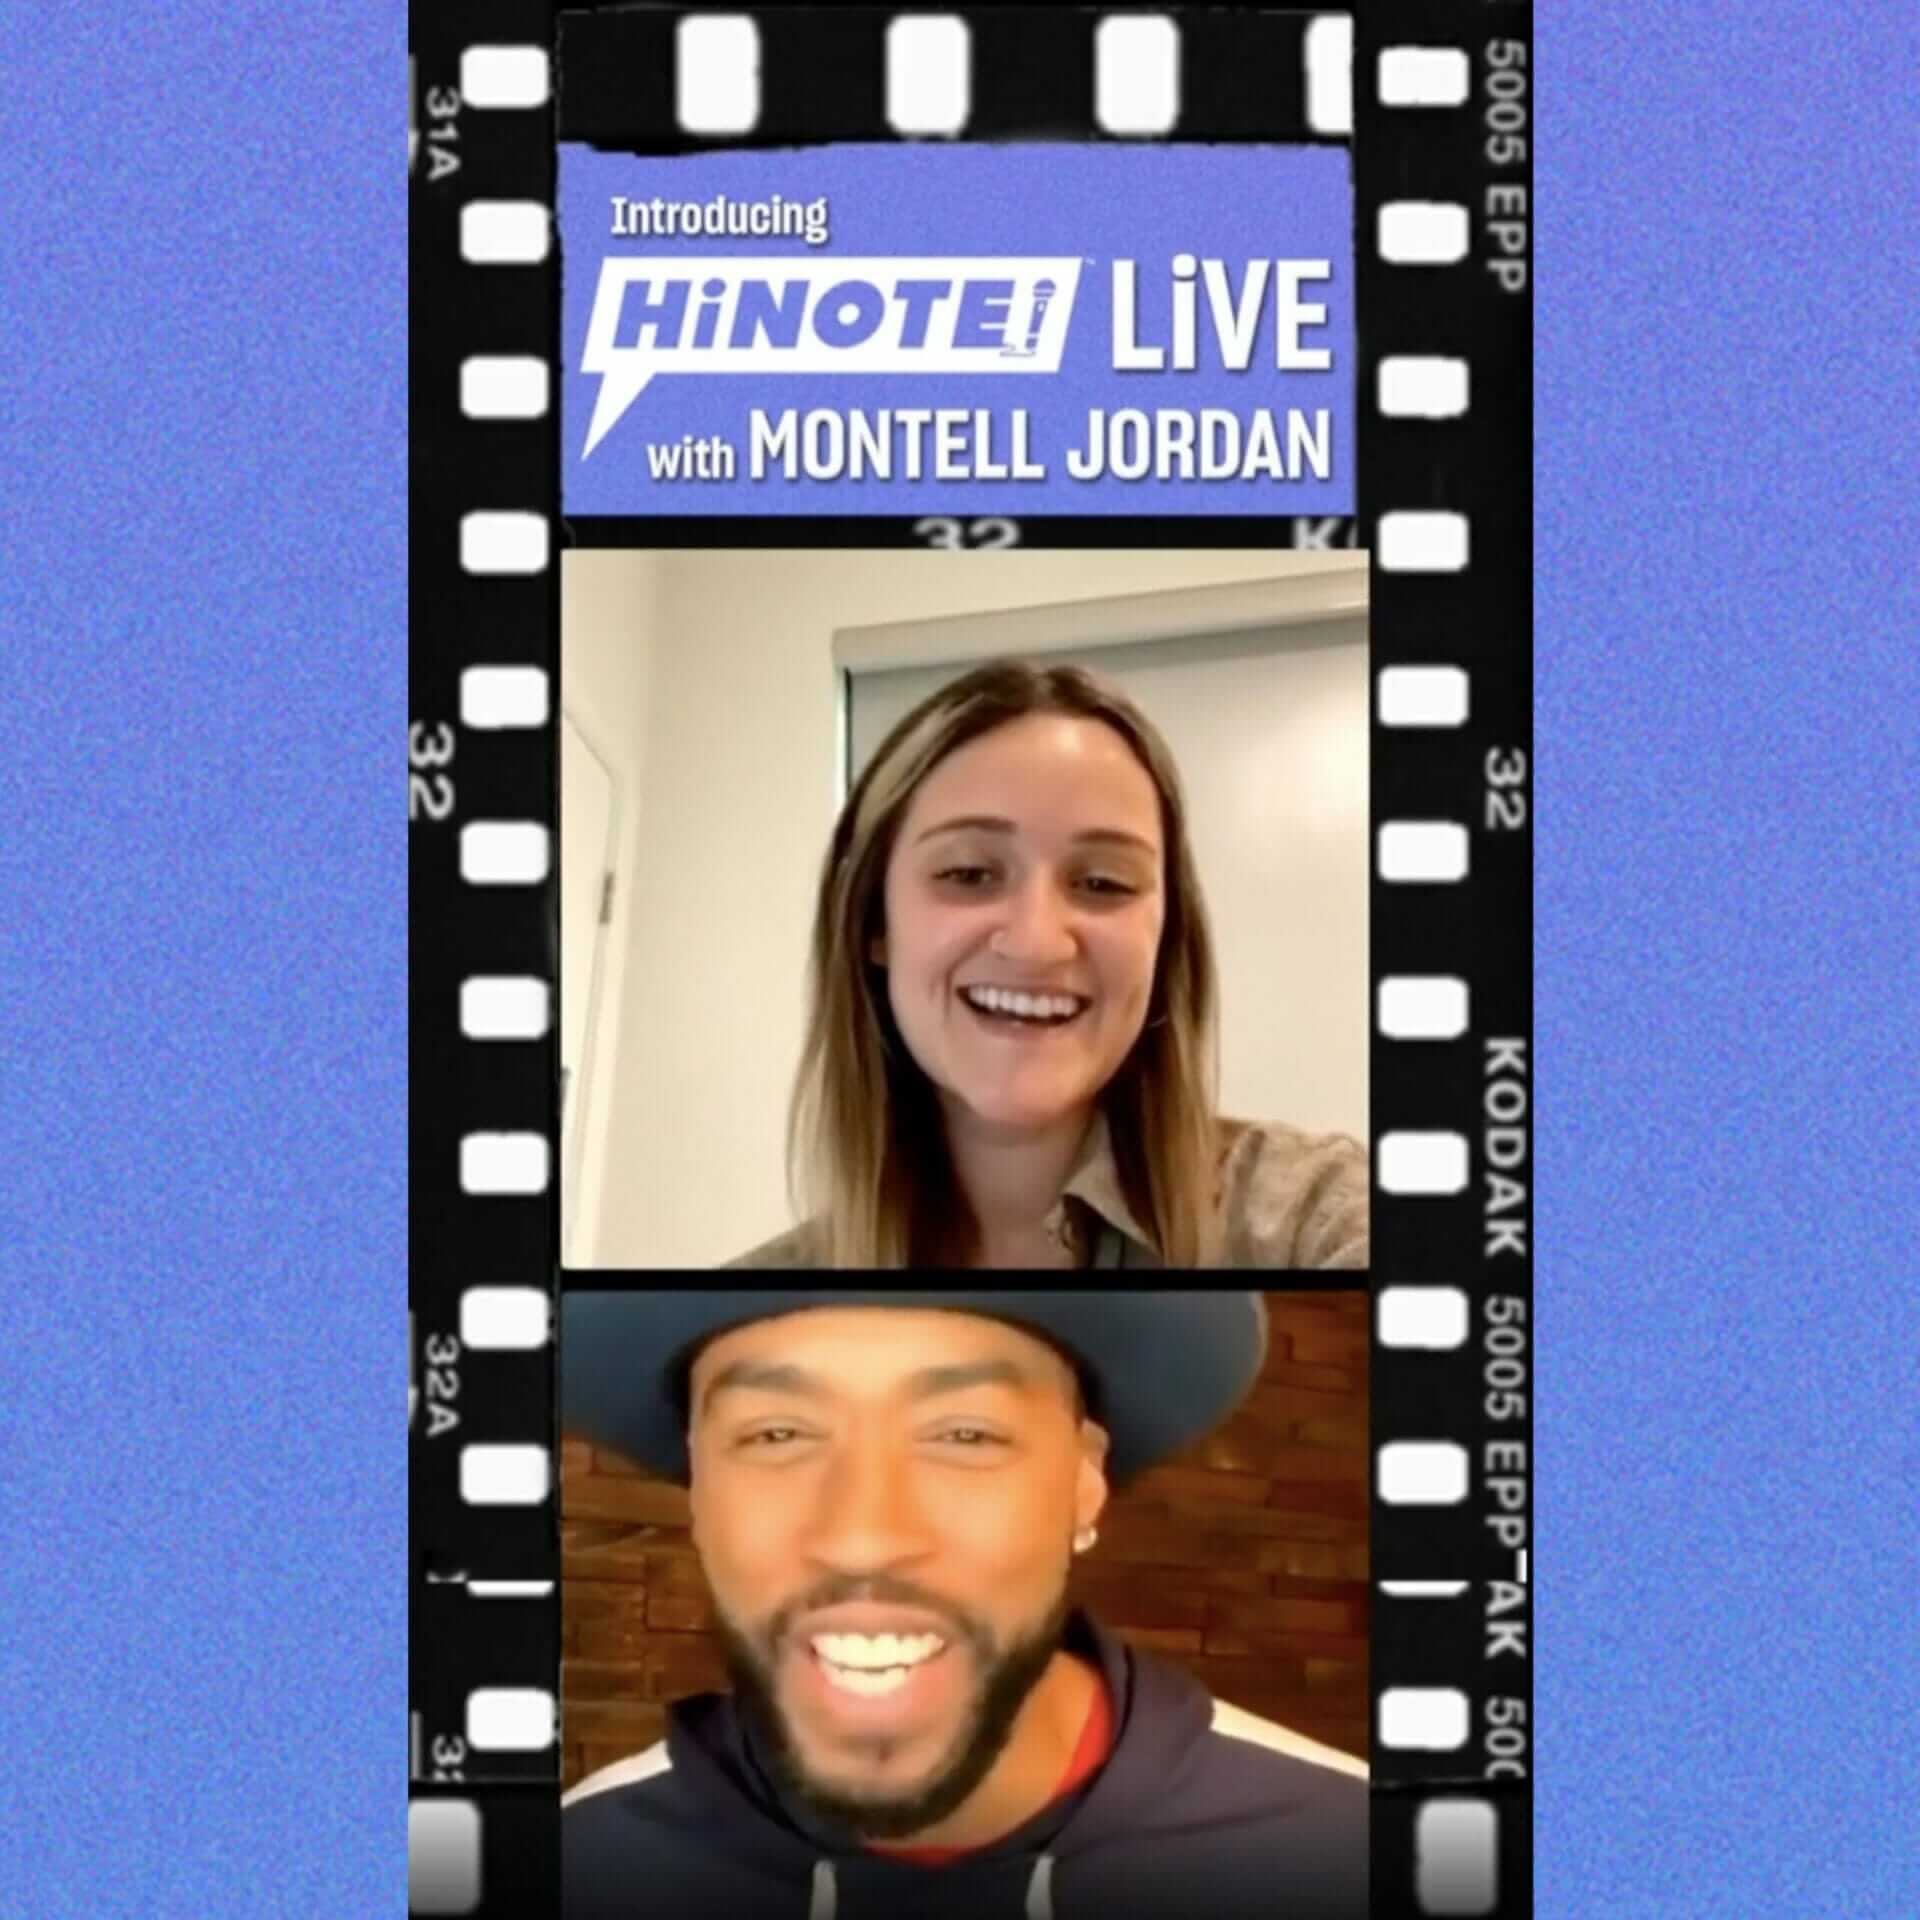 HiNOTE LiVE #8 with Montell Jordan